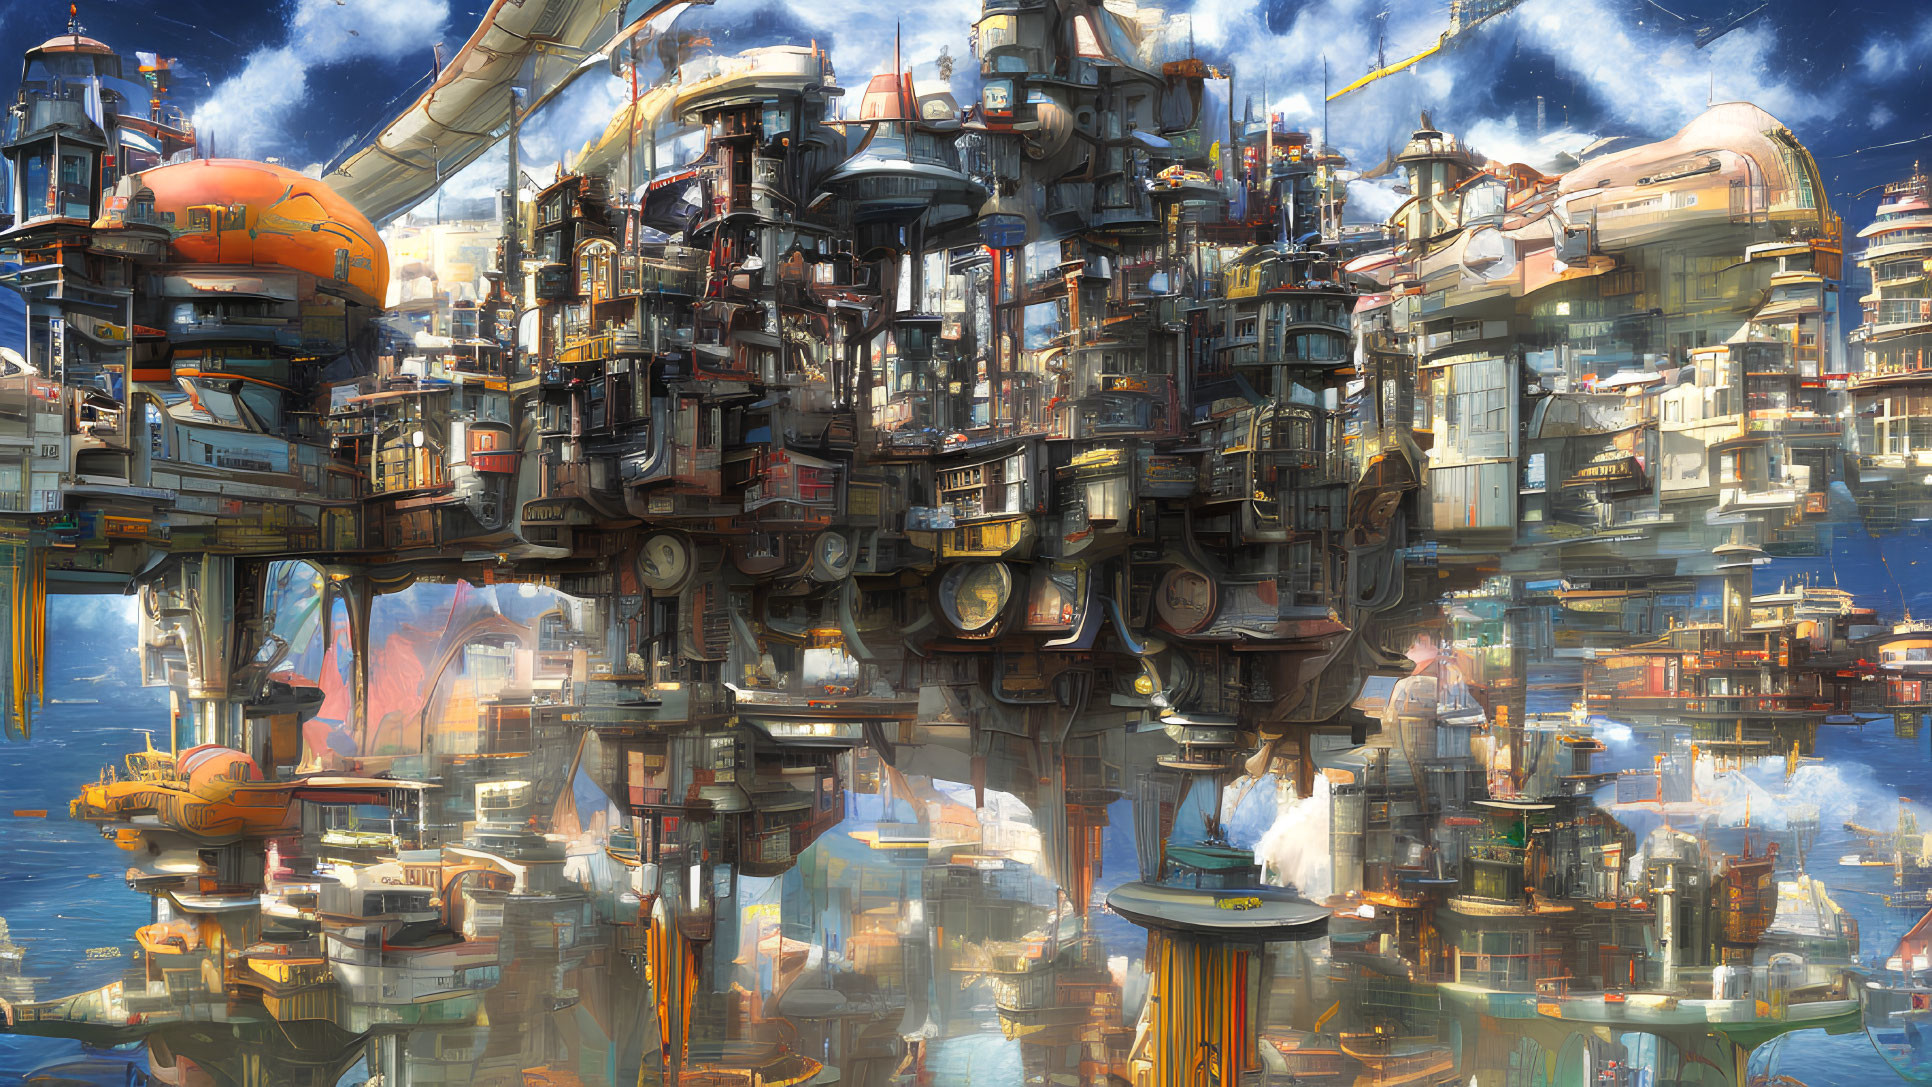 Futuristic cityscape with towering structures and advanced technology reflected on water